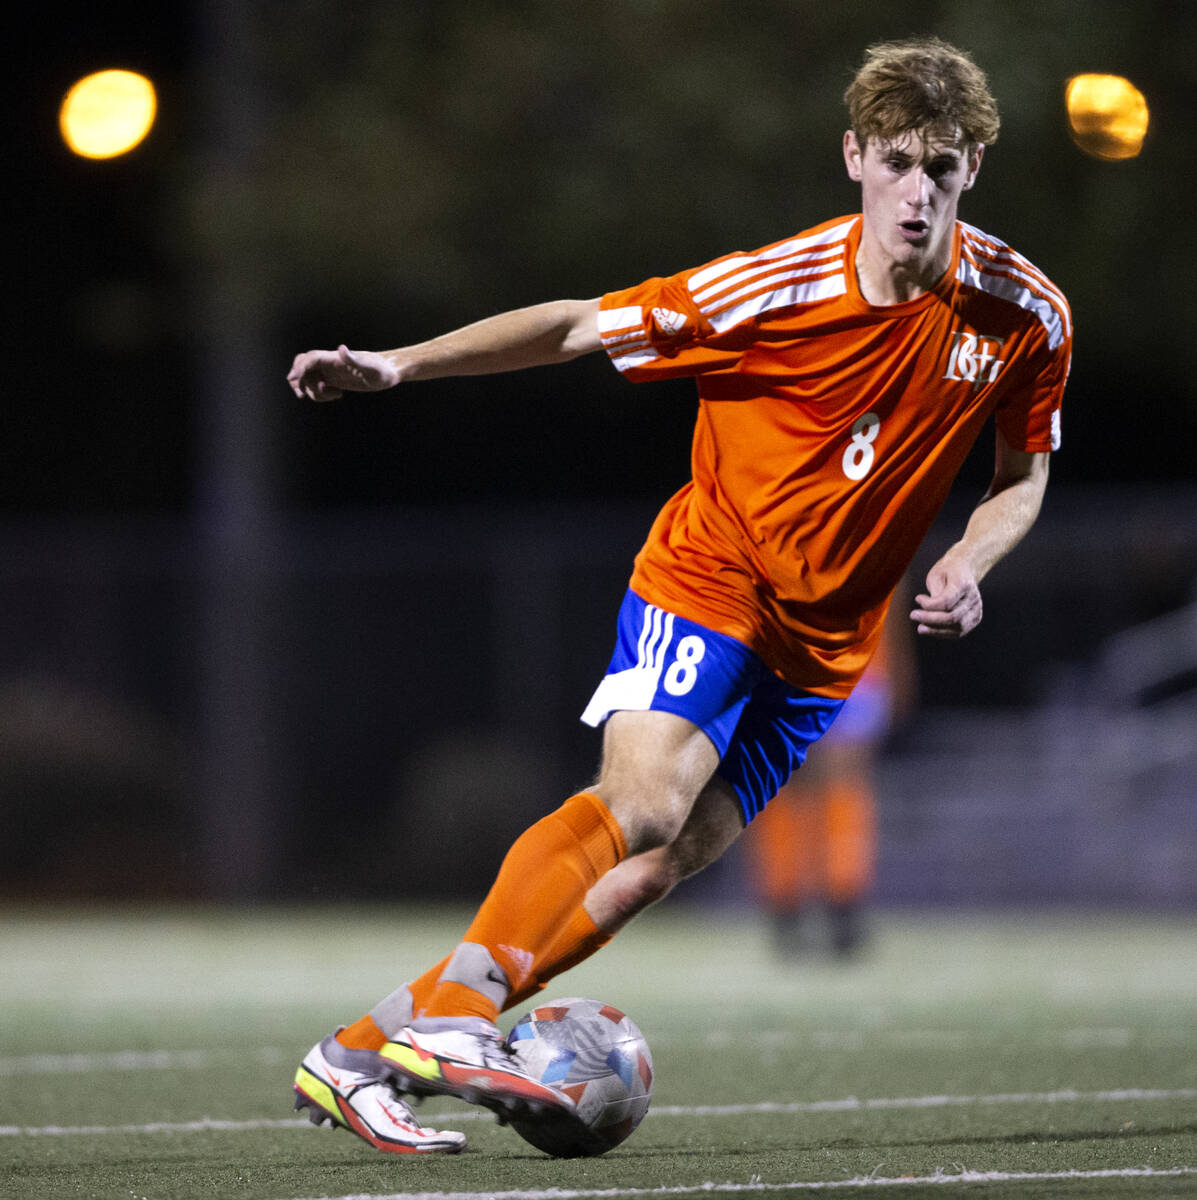 Bishop Gorman's Nathaniel Roberts (8) dribbles right before scoring a goal during a high school ...